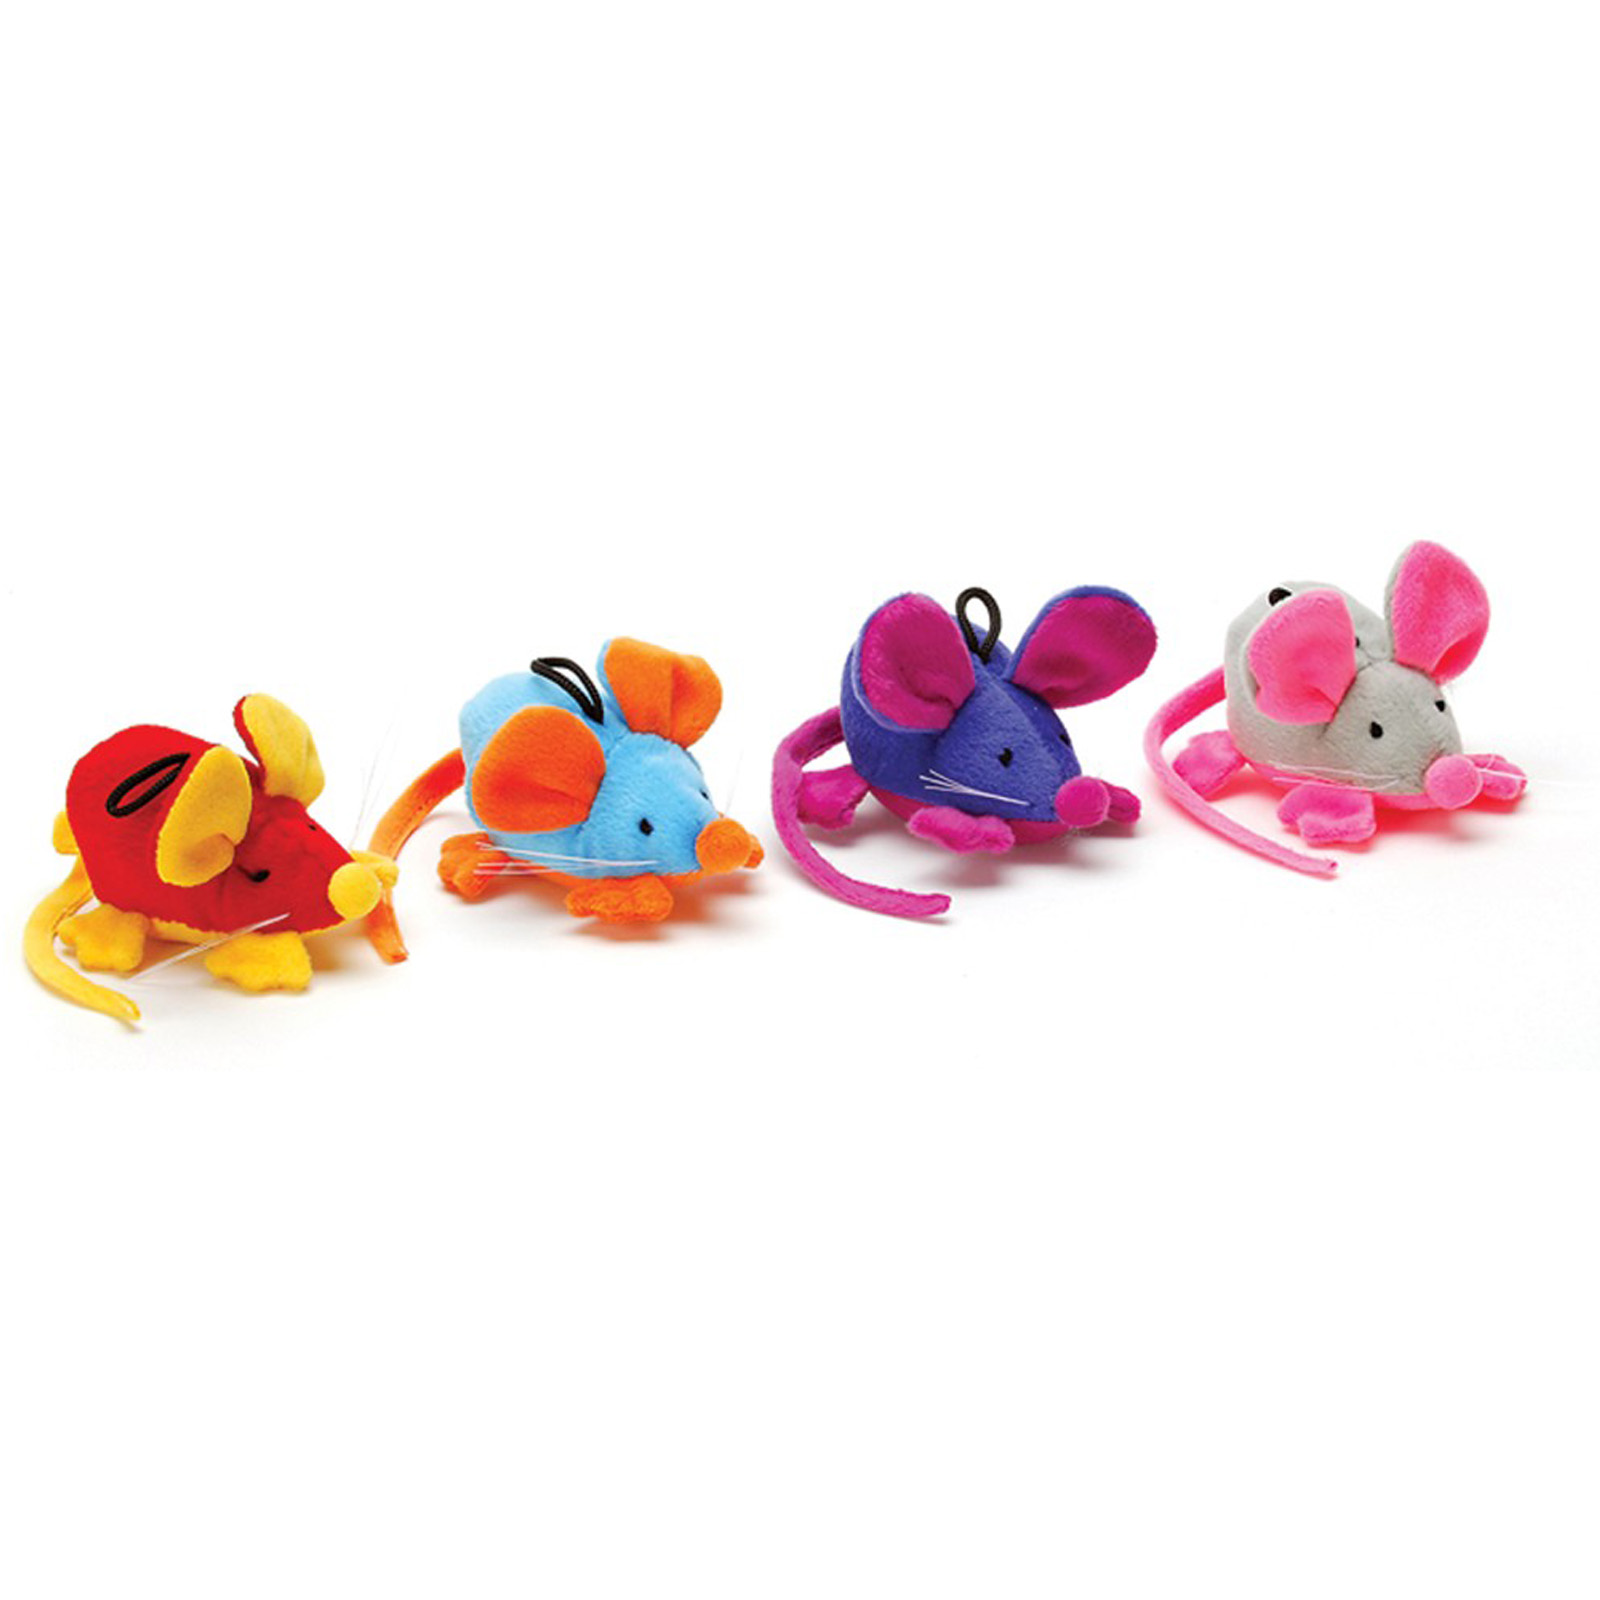 Ethical Products Inc. Toy Rattle Clatter Mouse